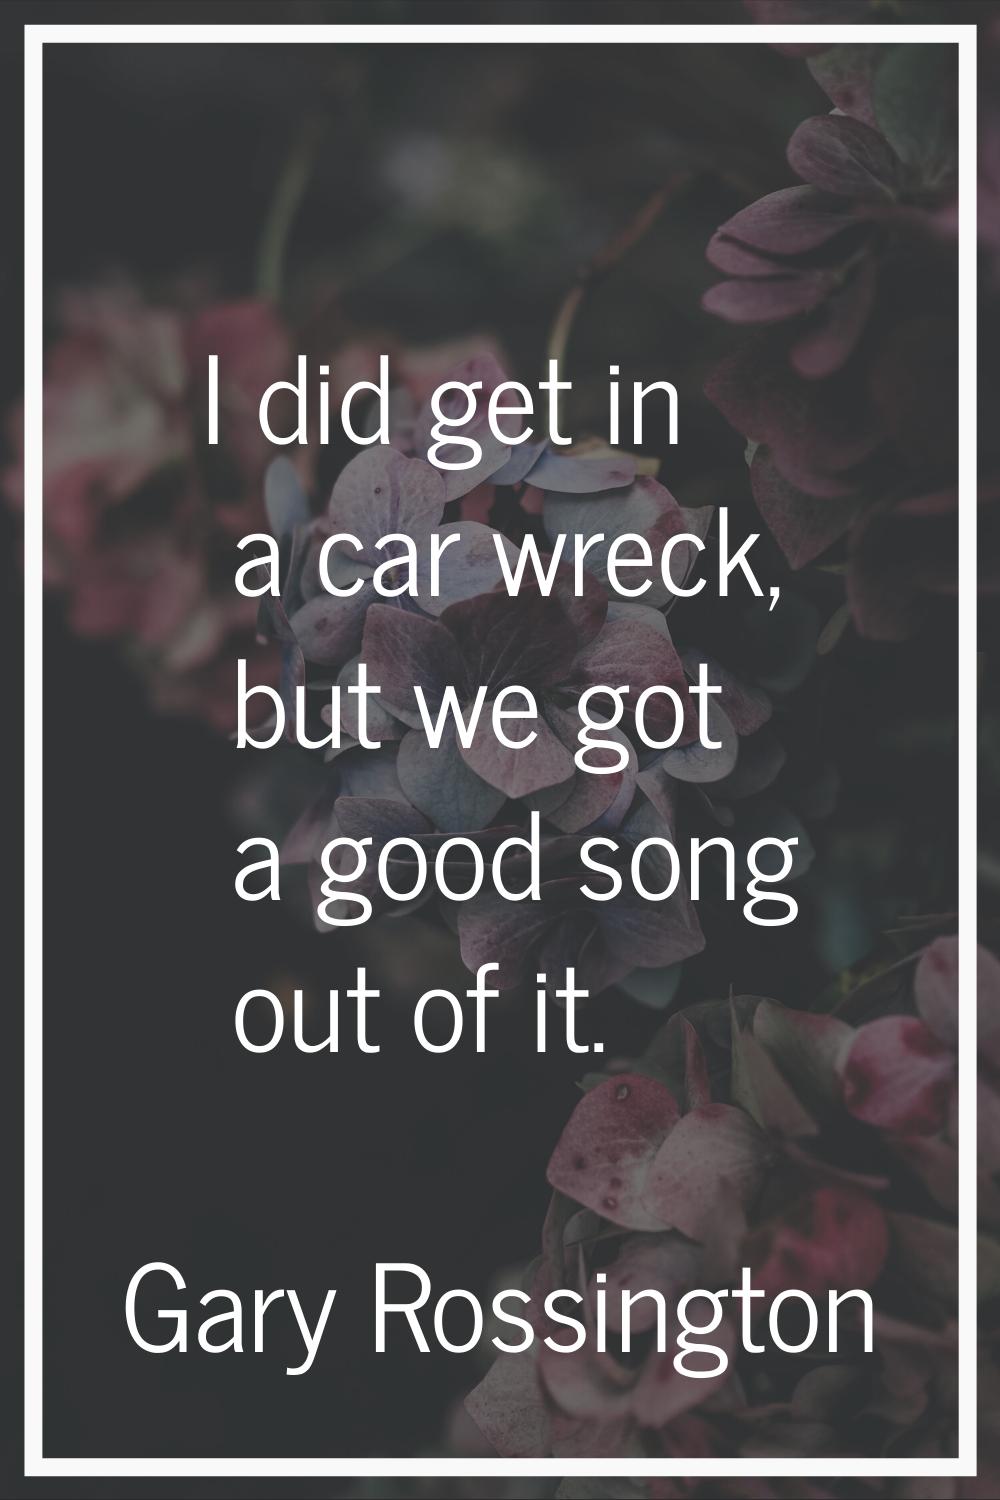 I did get in a car wreck, but we got a good song out of it.